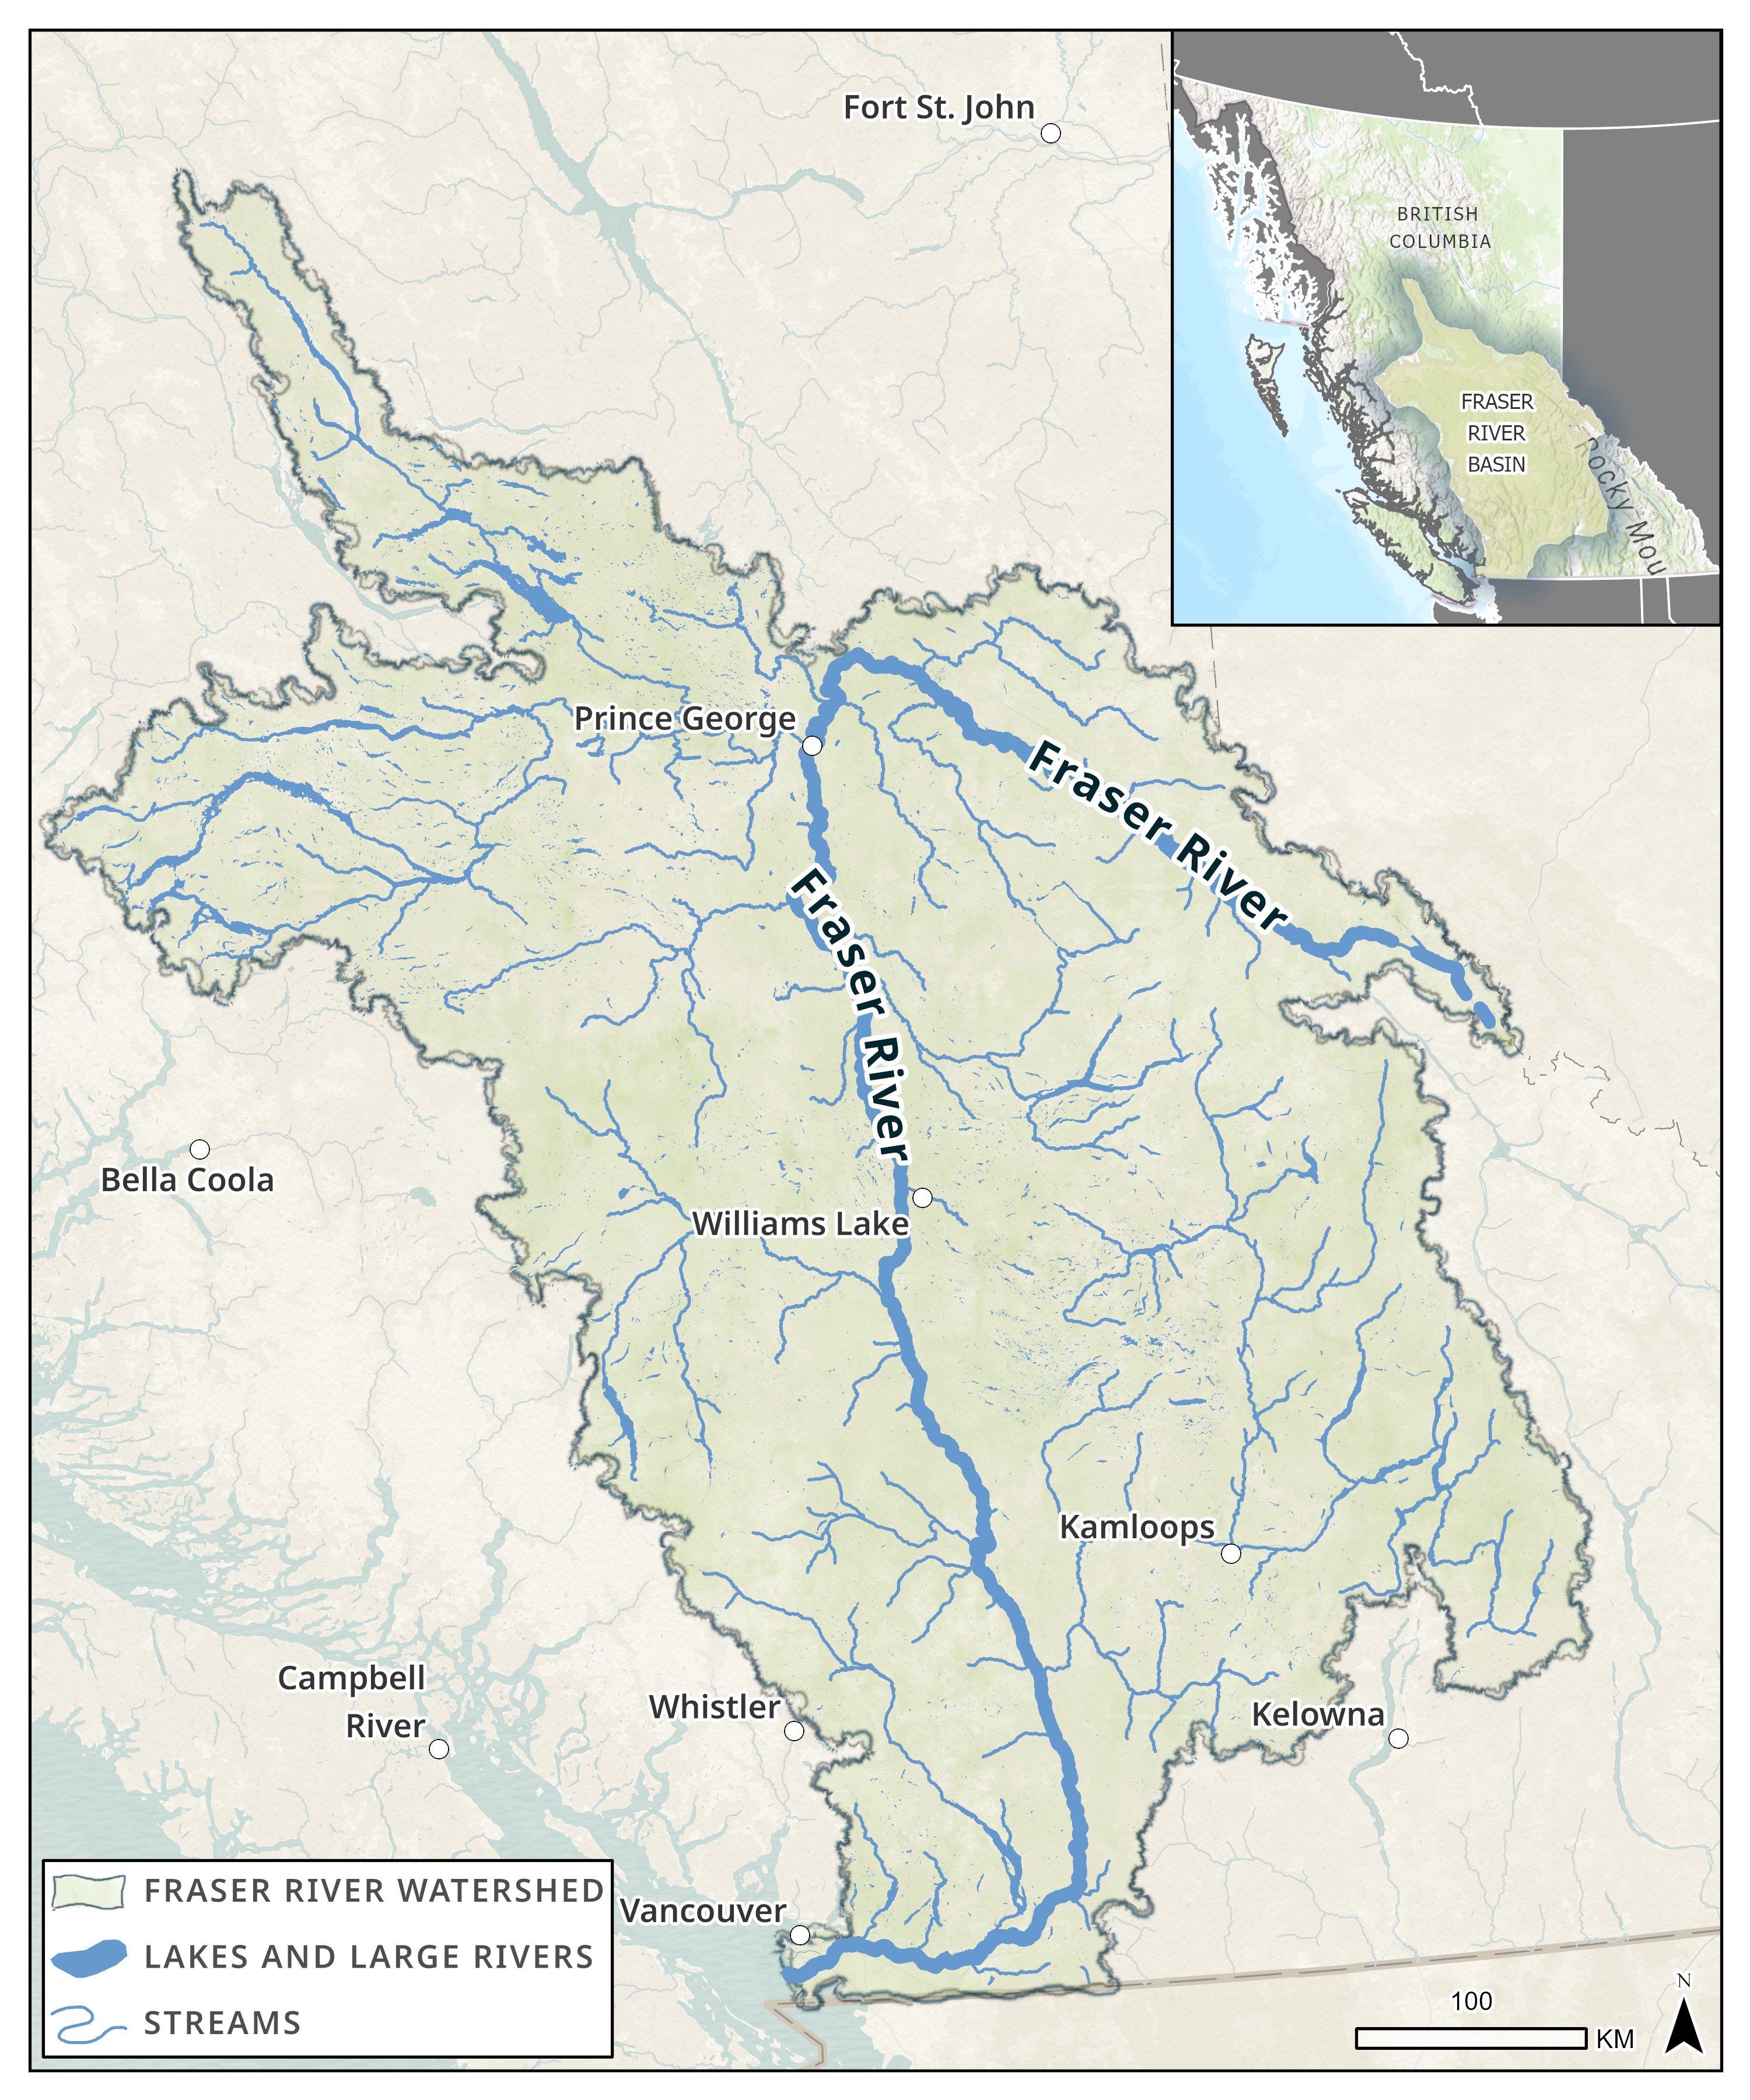 Map of the Fraser River. It is part of the Fraser River Basin, which spans much of southern BC. This map shows its source, tributaries, and the population centres in BC, Canada.